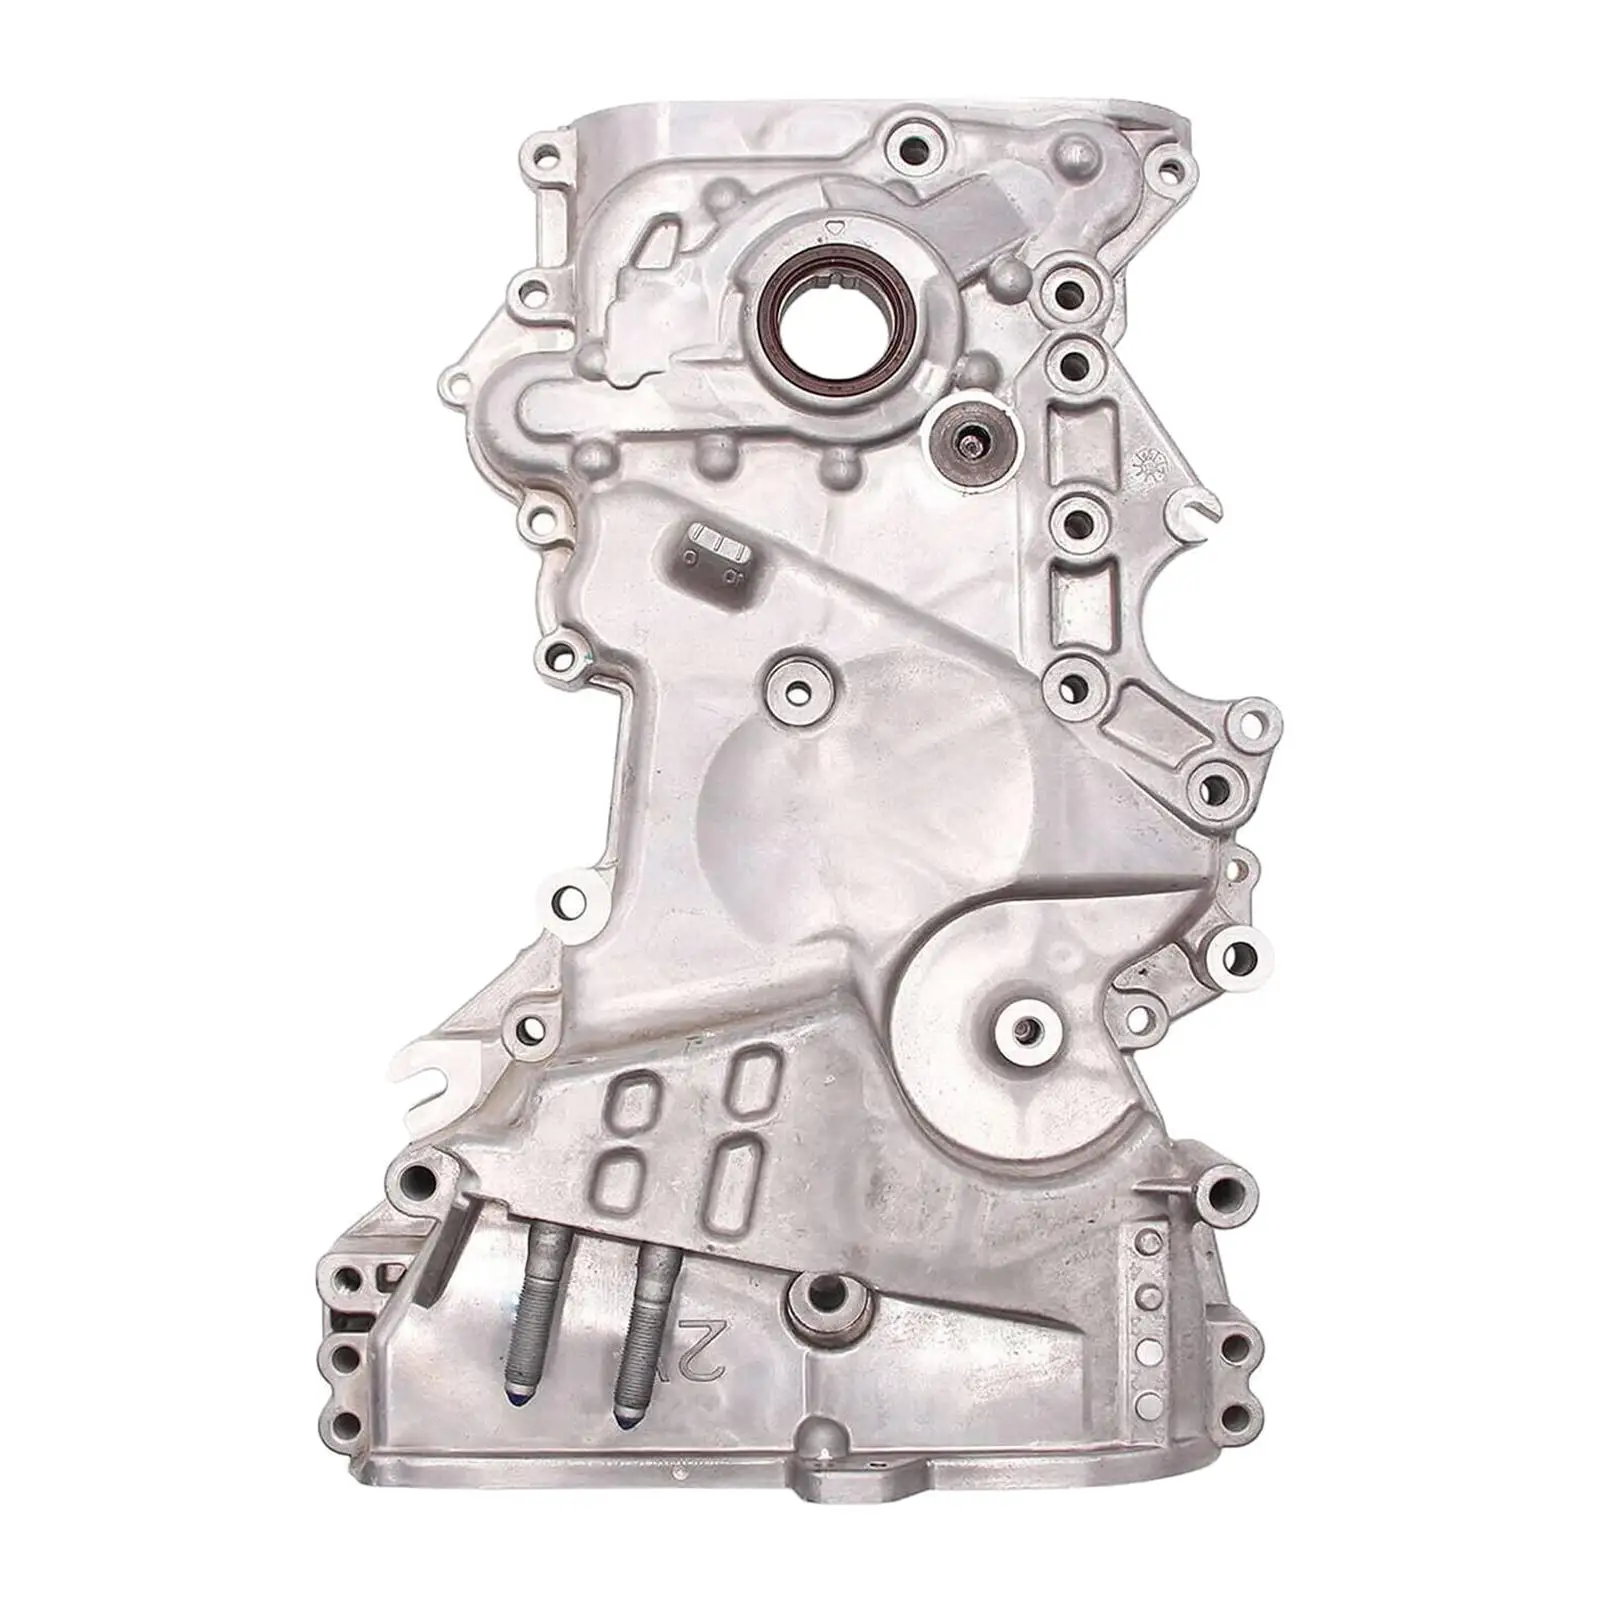 Engine Oil Pump for 2.0L 2014-2019 High Reliability